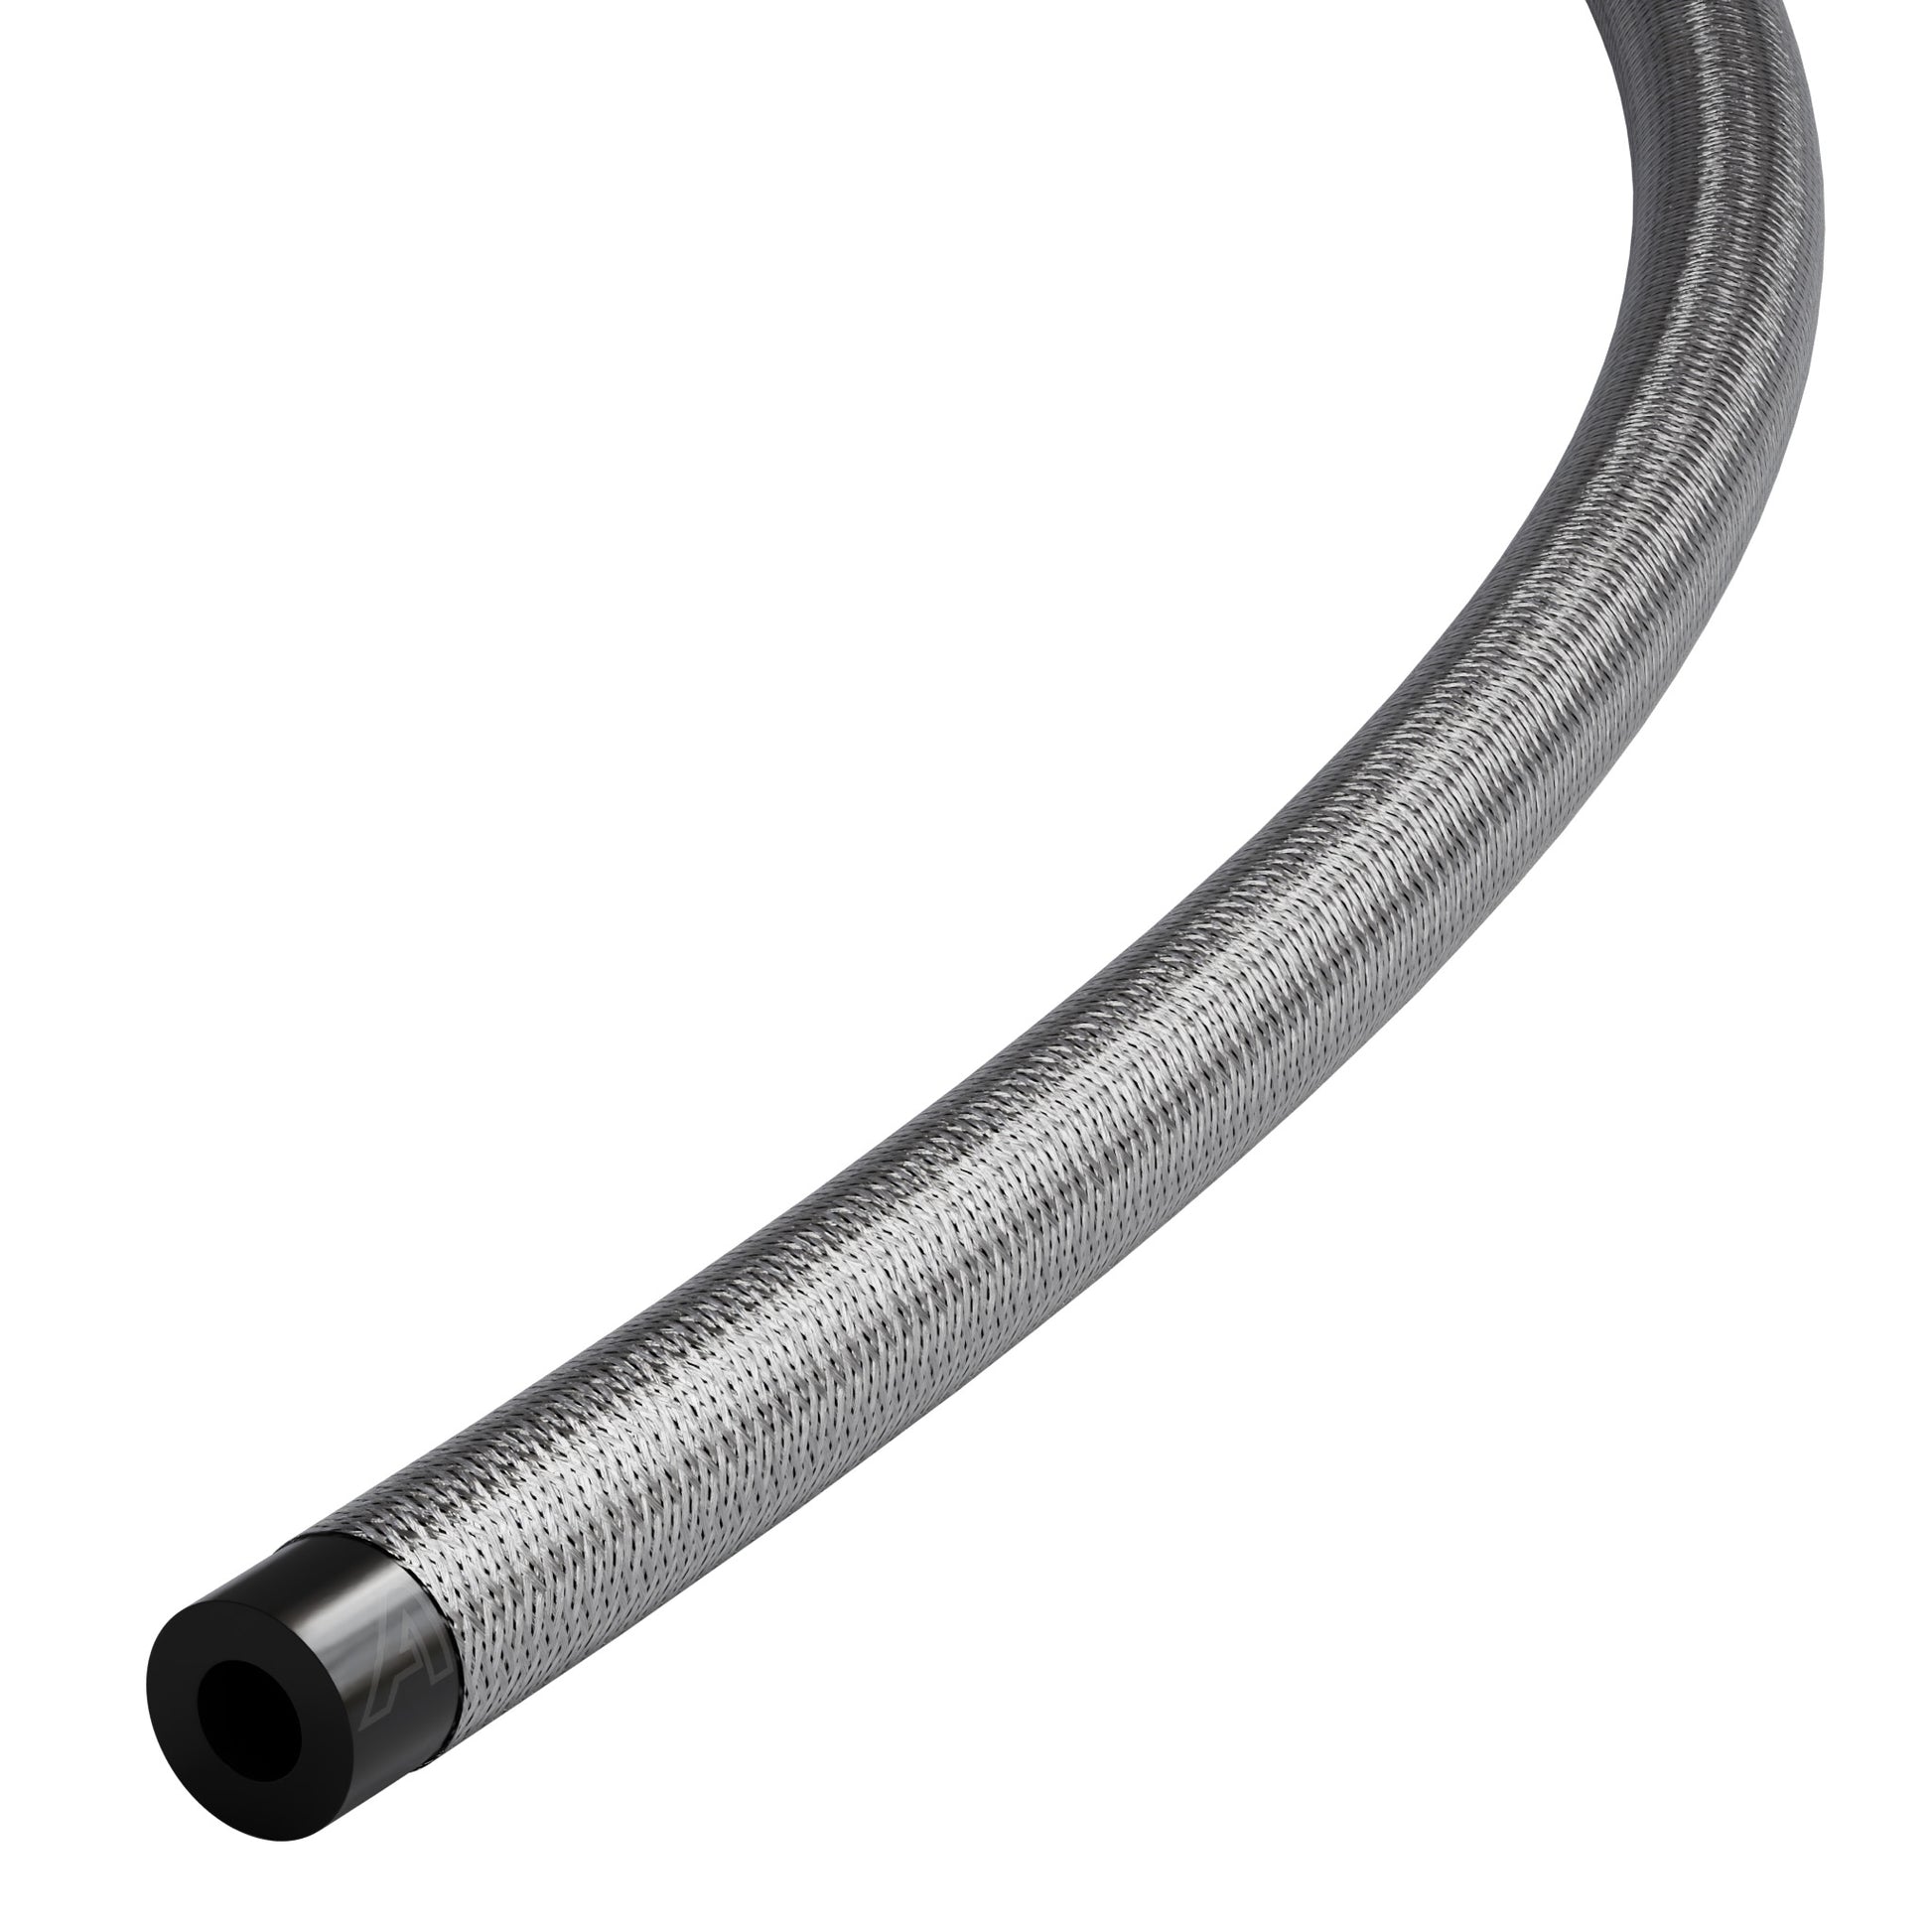 6mm ID Stainless Steel Braided Rubber Fuel Hose BS5118/2 - Silicone Hose UK